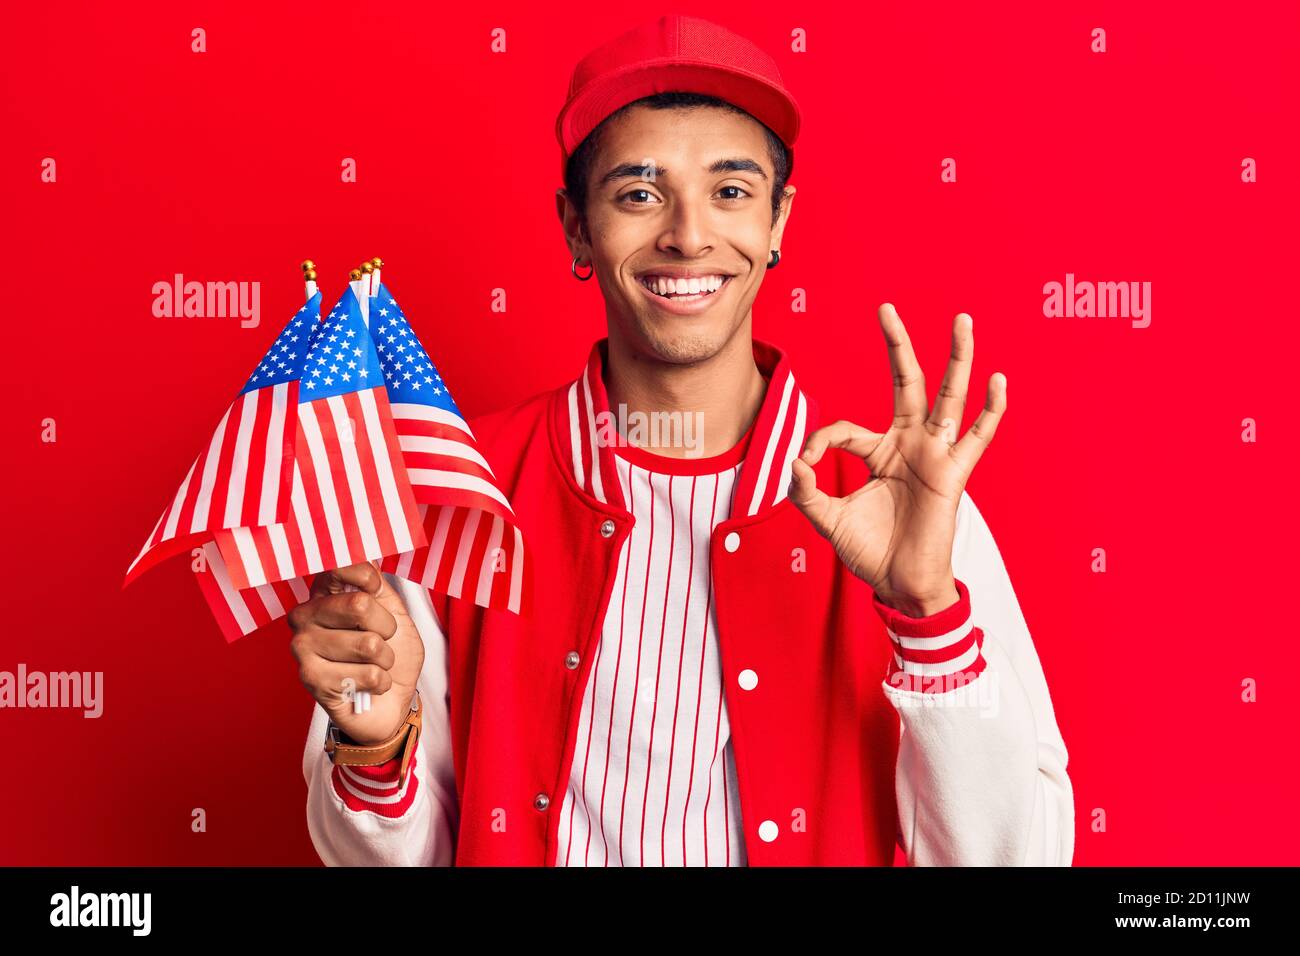 Young african amercian man wearing baseball uniform holding america flags doing ok sign with fingers, smiling friendly gesturing excellent symbol Stock Photo